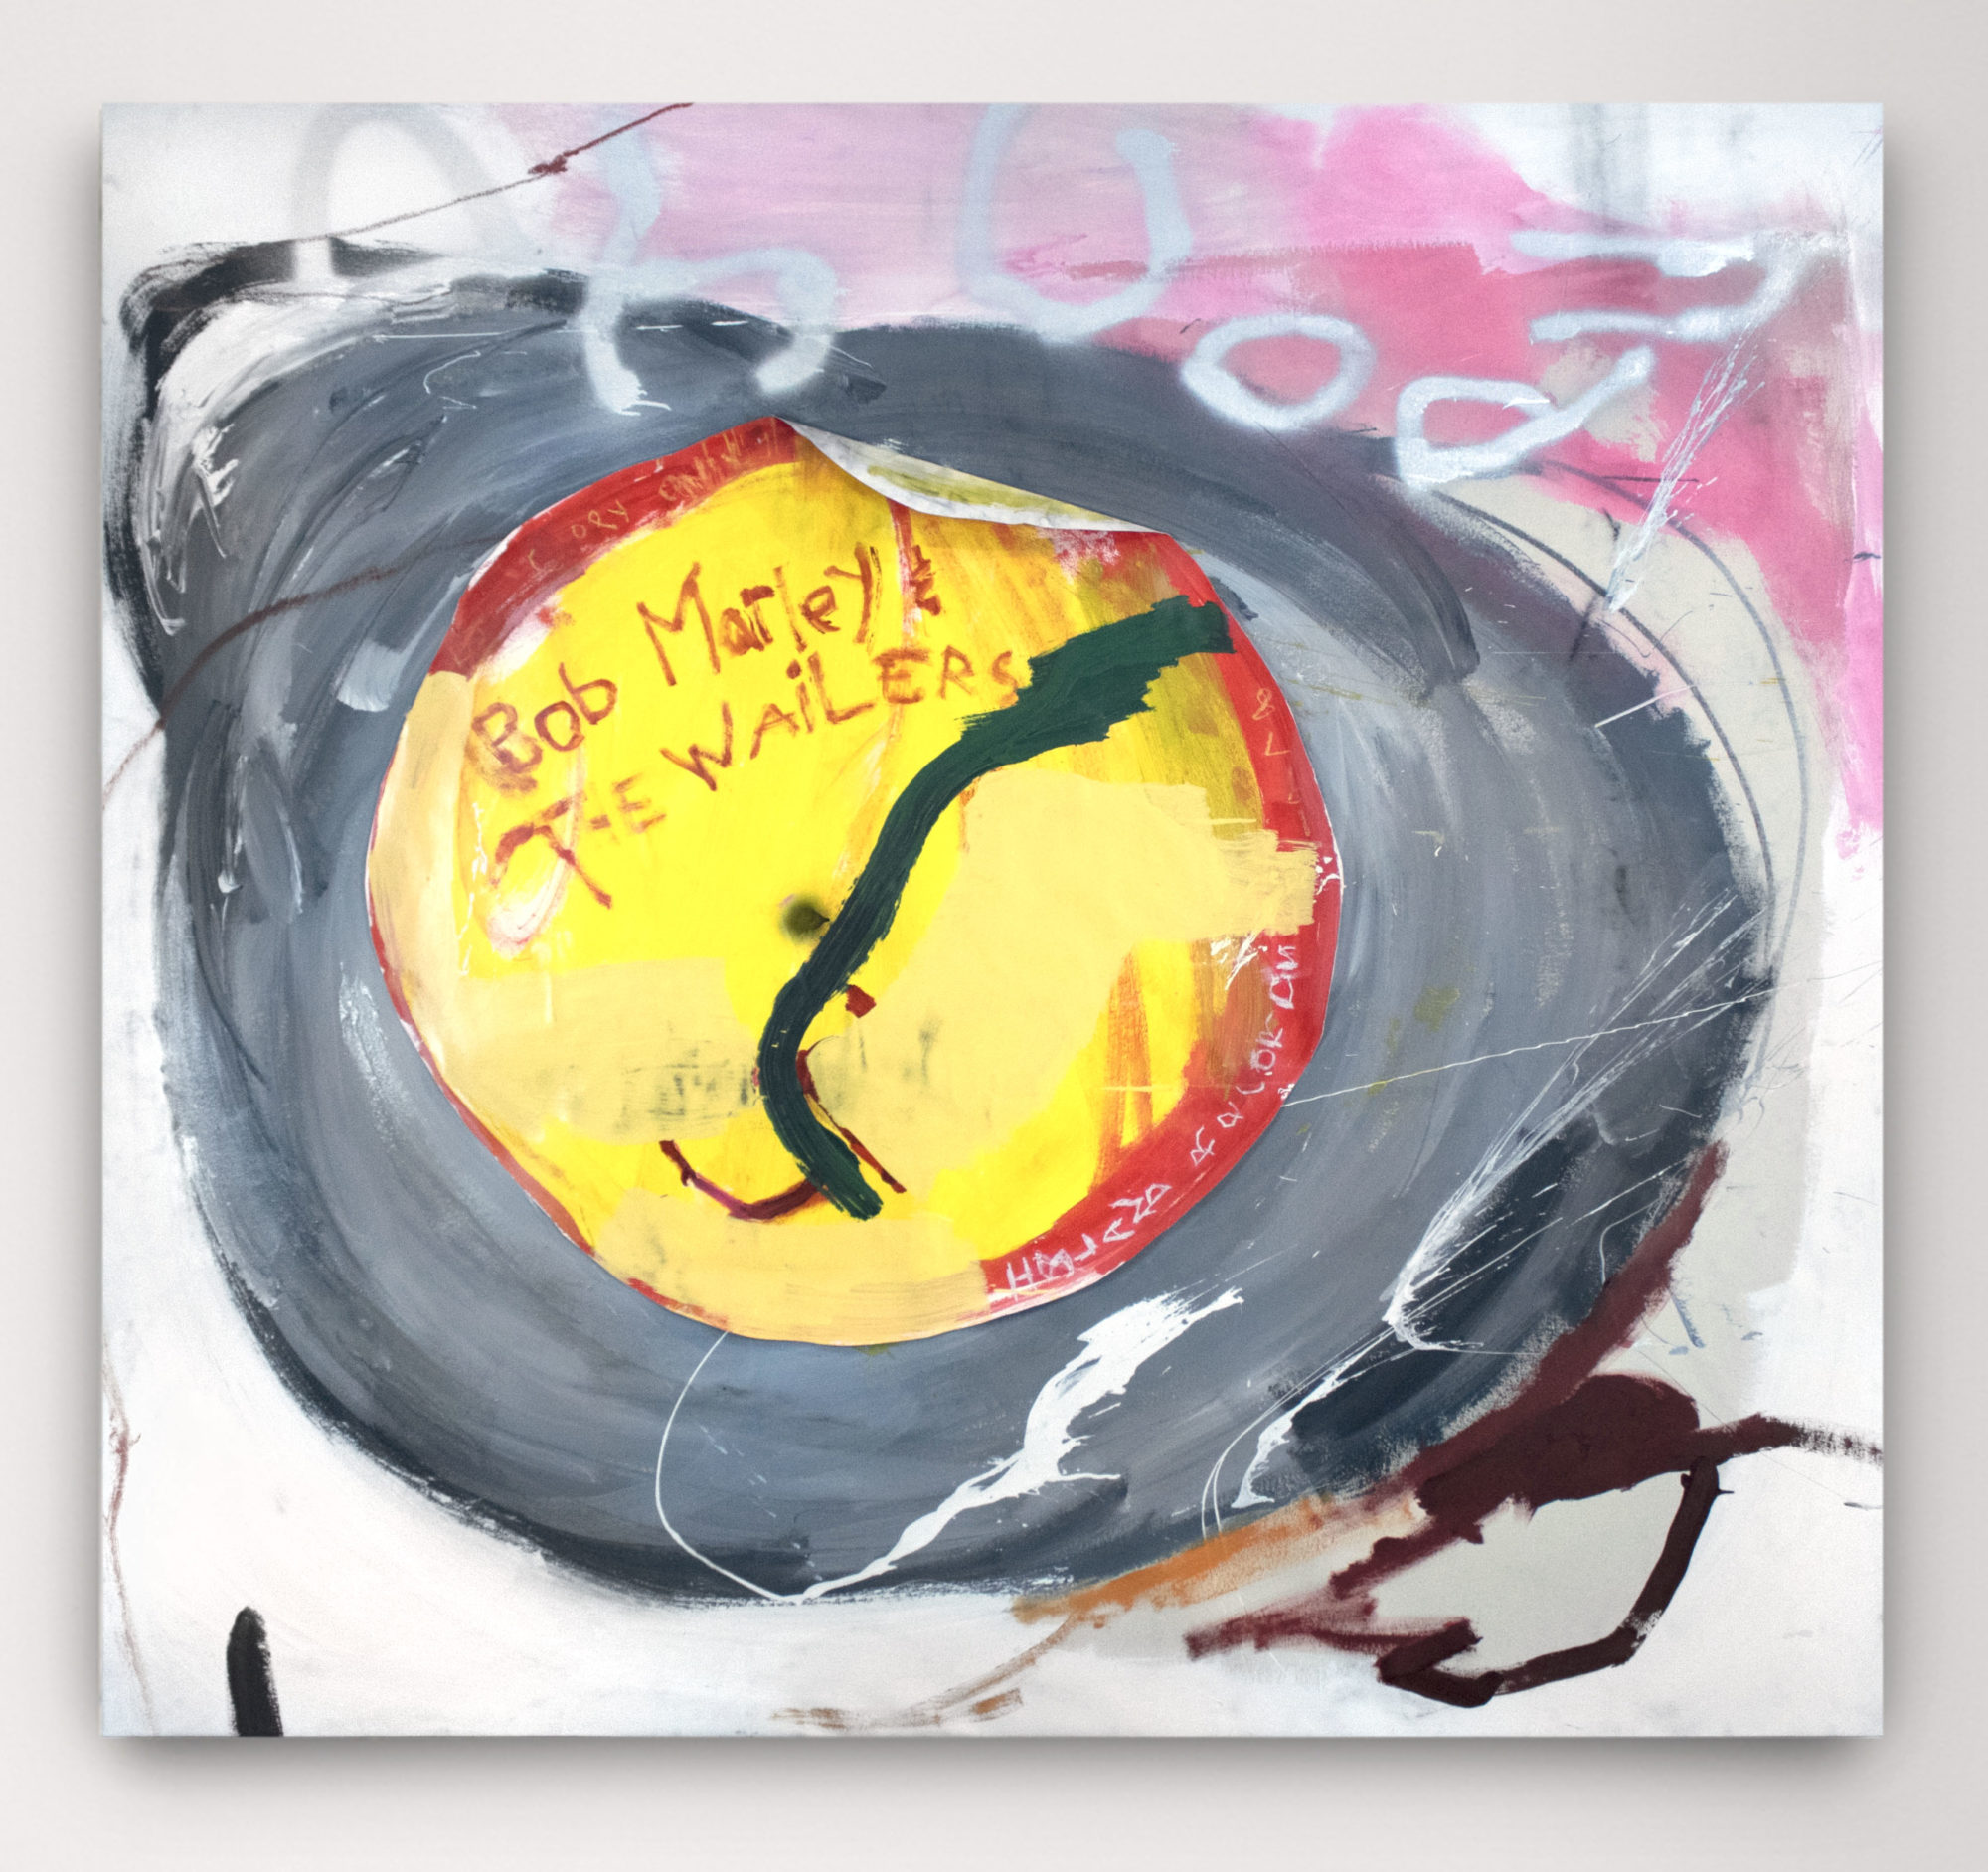 Image of 'Crisis (DJ Copy) by Sahlehe. The image consists of a circular field of gray surrounding a circular field of yellow and red containing the words 'Bob Marley & The Wailers'